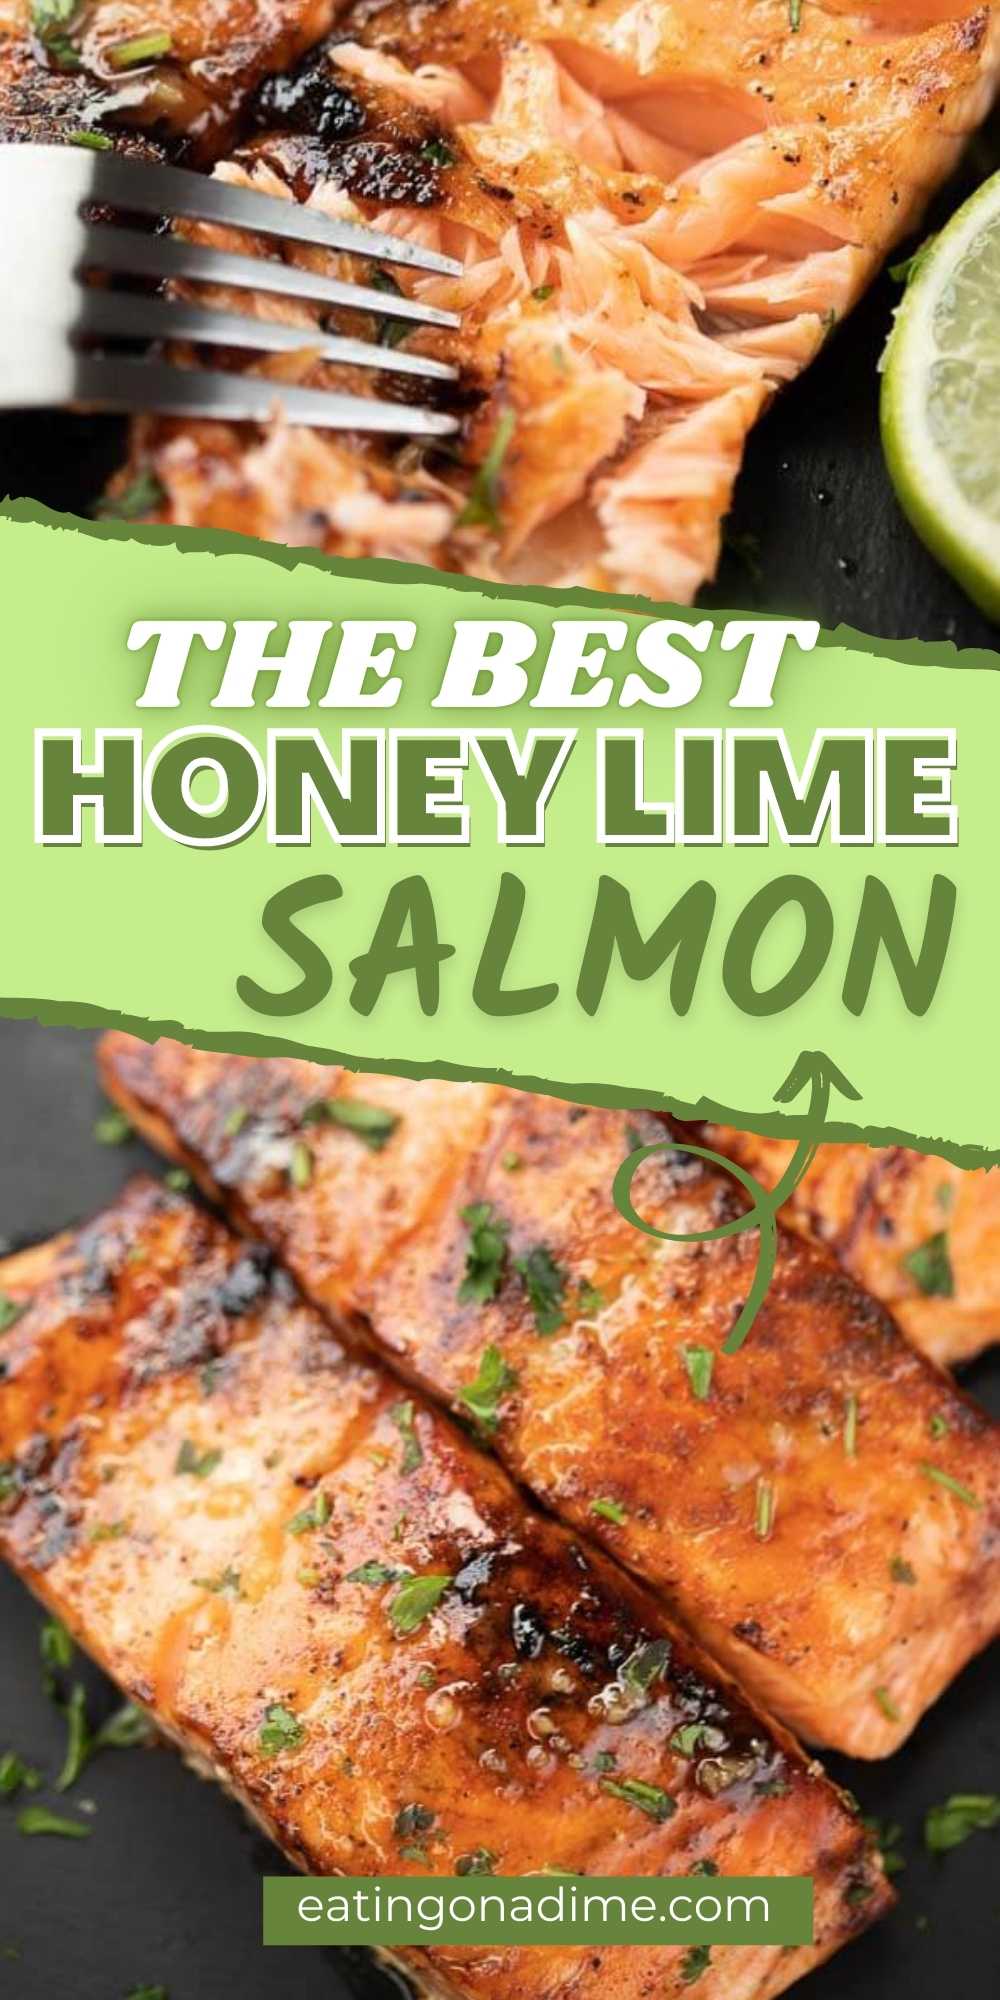 Try this easy honey glazed salmon recipe is one of my favorite salmon dinner ideas! It is delicious with the tanginess of lime added into the honey and is a delicious pan seared and easy salmon recipe. This quick and simple salmon recipe is the best! You will love this honey lime salmon recipe.  #eatingonadime #salmonrecipes #seafoodrecipes #fishrecipes 
